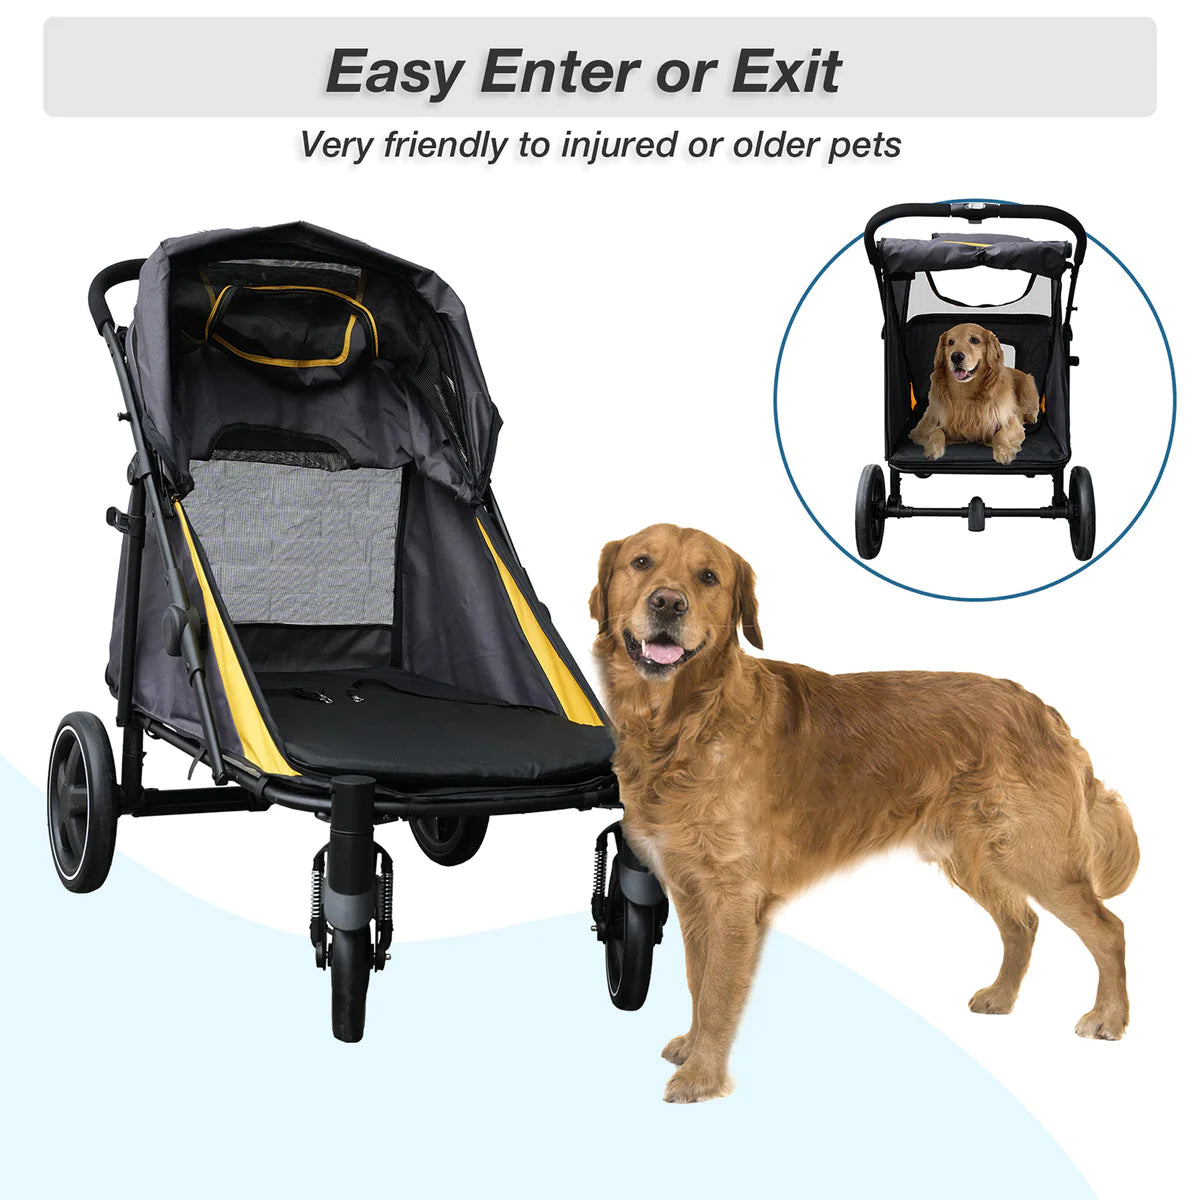 Foldable Pet Stroller Travel Carrier with Storage Pocket, Breathable Mesh, Gray and Yellow | karmasfar.us